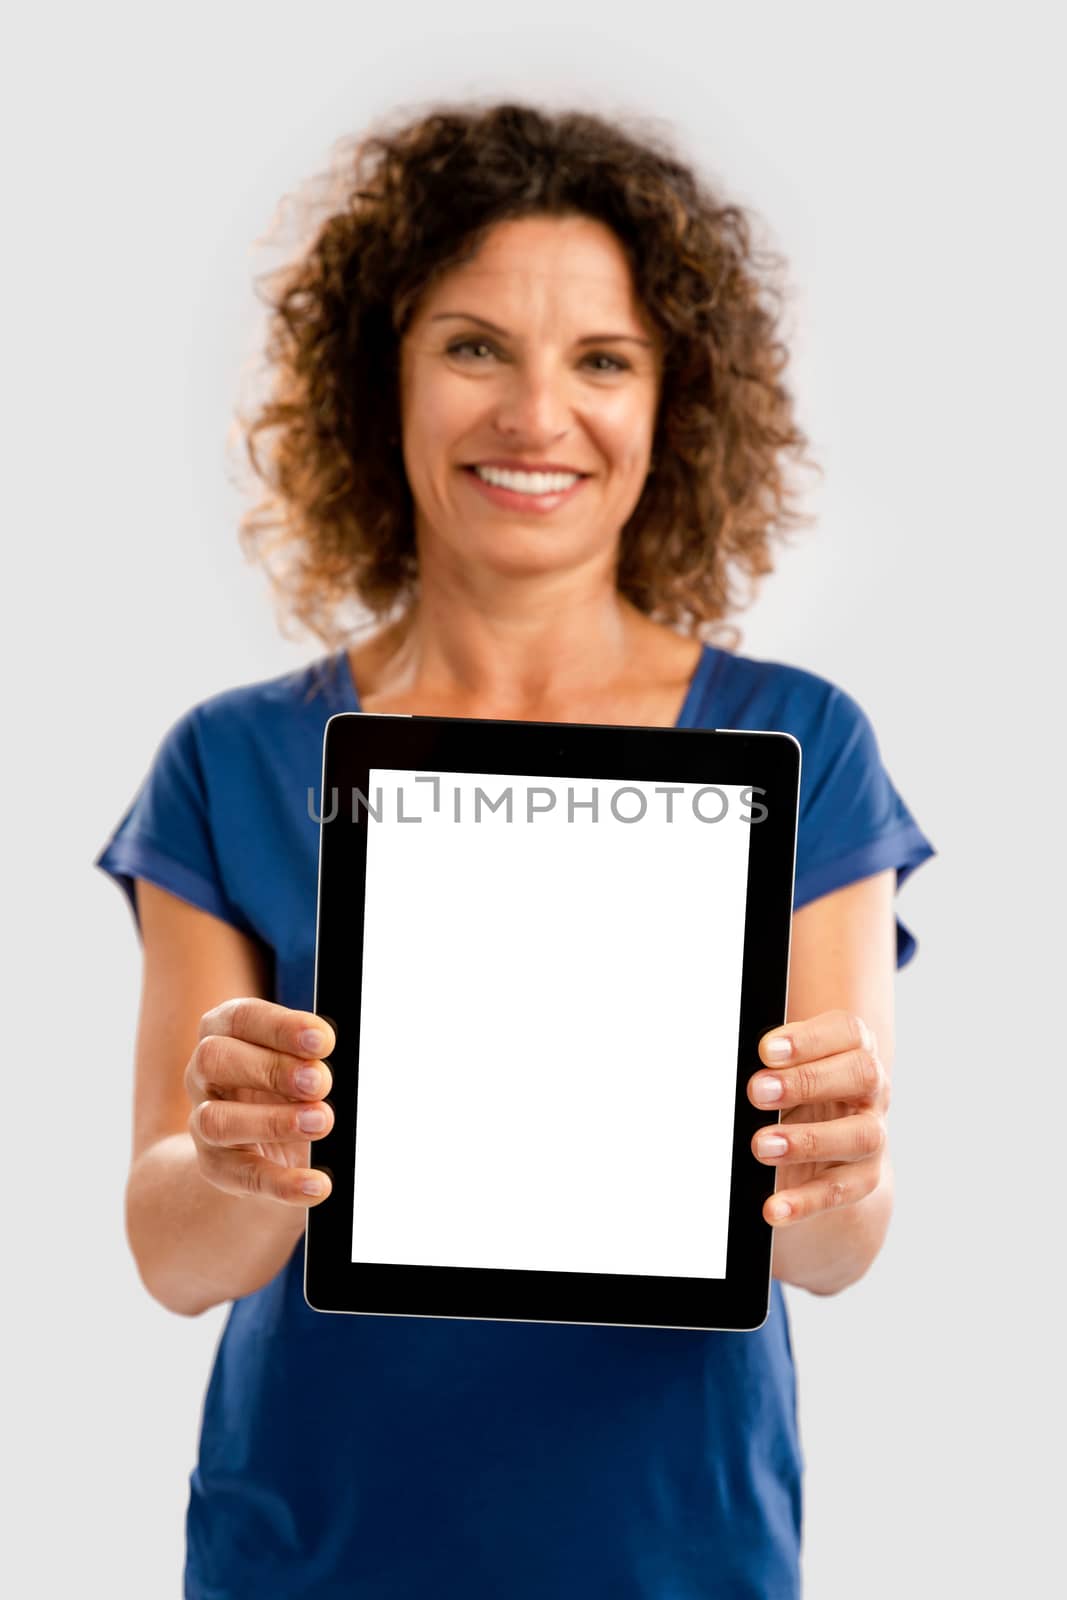 Happy woman holding tablet by Iko